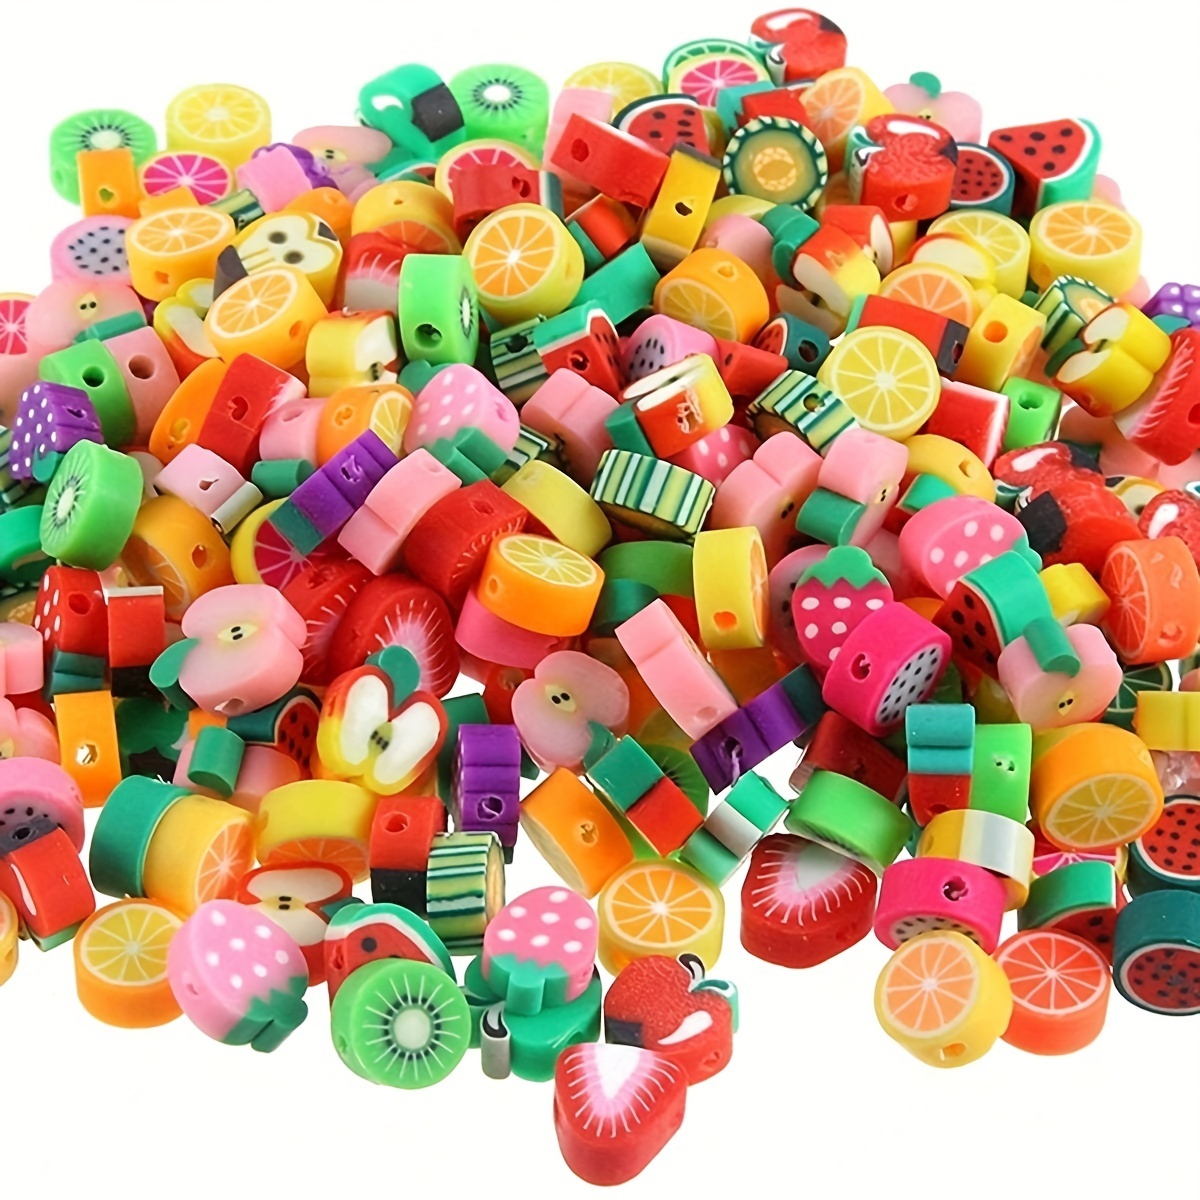 

100pcs Mixed Fruit Polymer Clay Spacer Beads For Jewelry Making Necklace Bracelet Earrings Accessories Diy Handmade Crafts